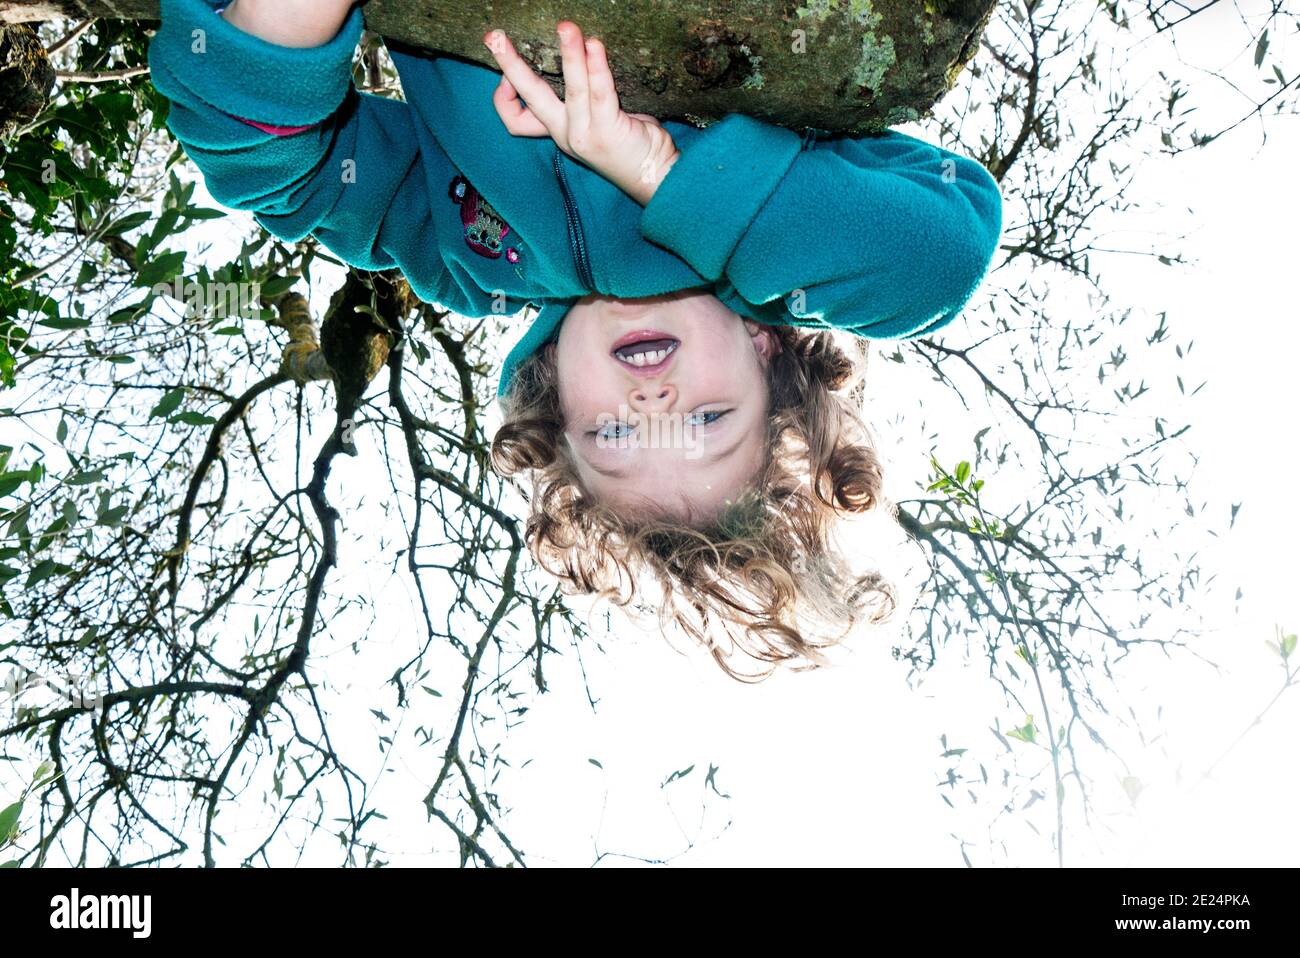 Girl hanging upside down in a tree, Italy Stock Photo